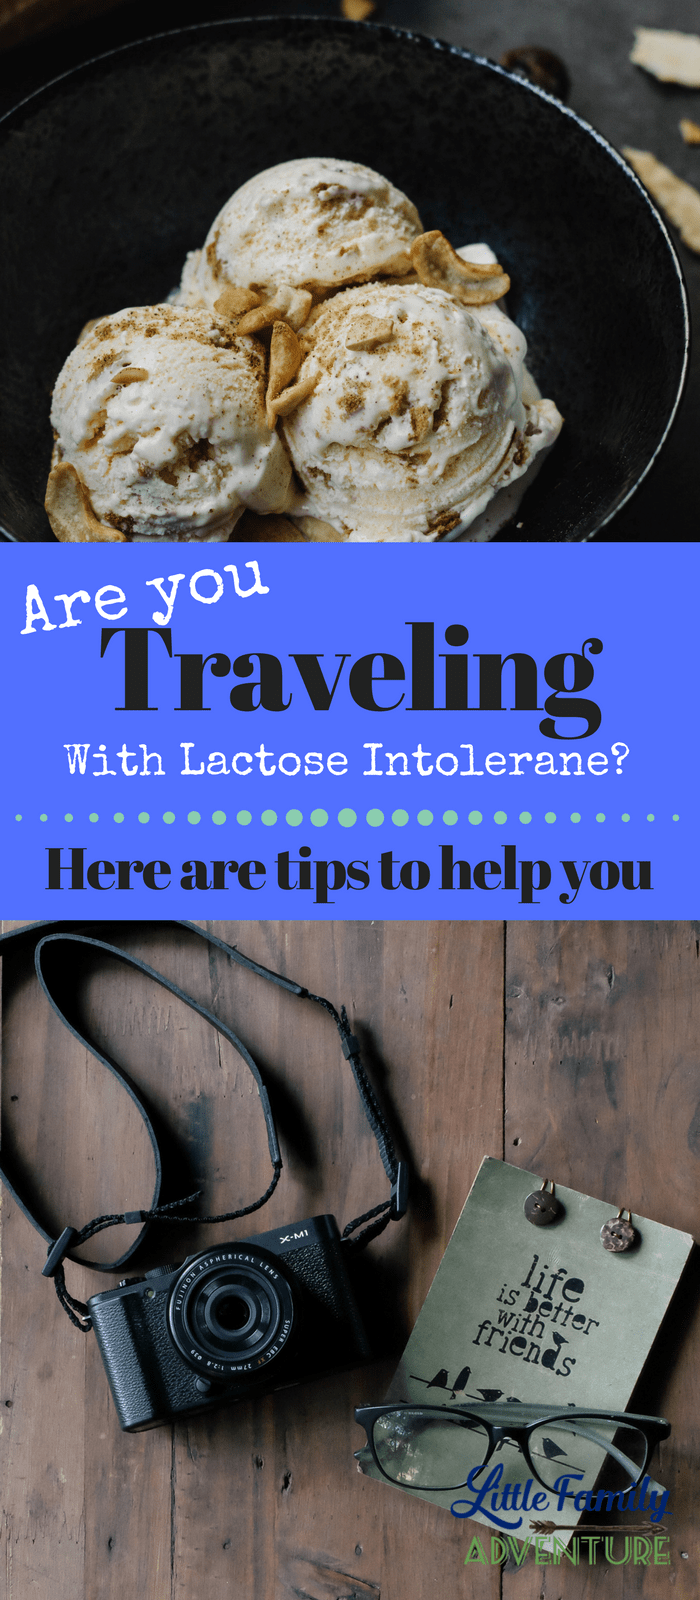 Traveling with food allergies isn't easy but shouldn't prevent you from traveling. Here are a few tips for traveling with lactose intolerance.